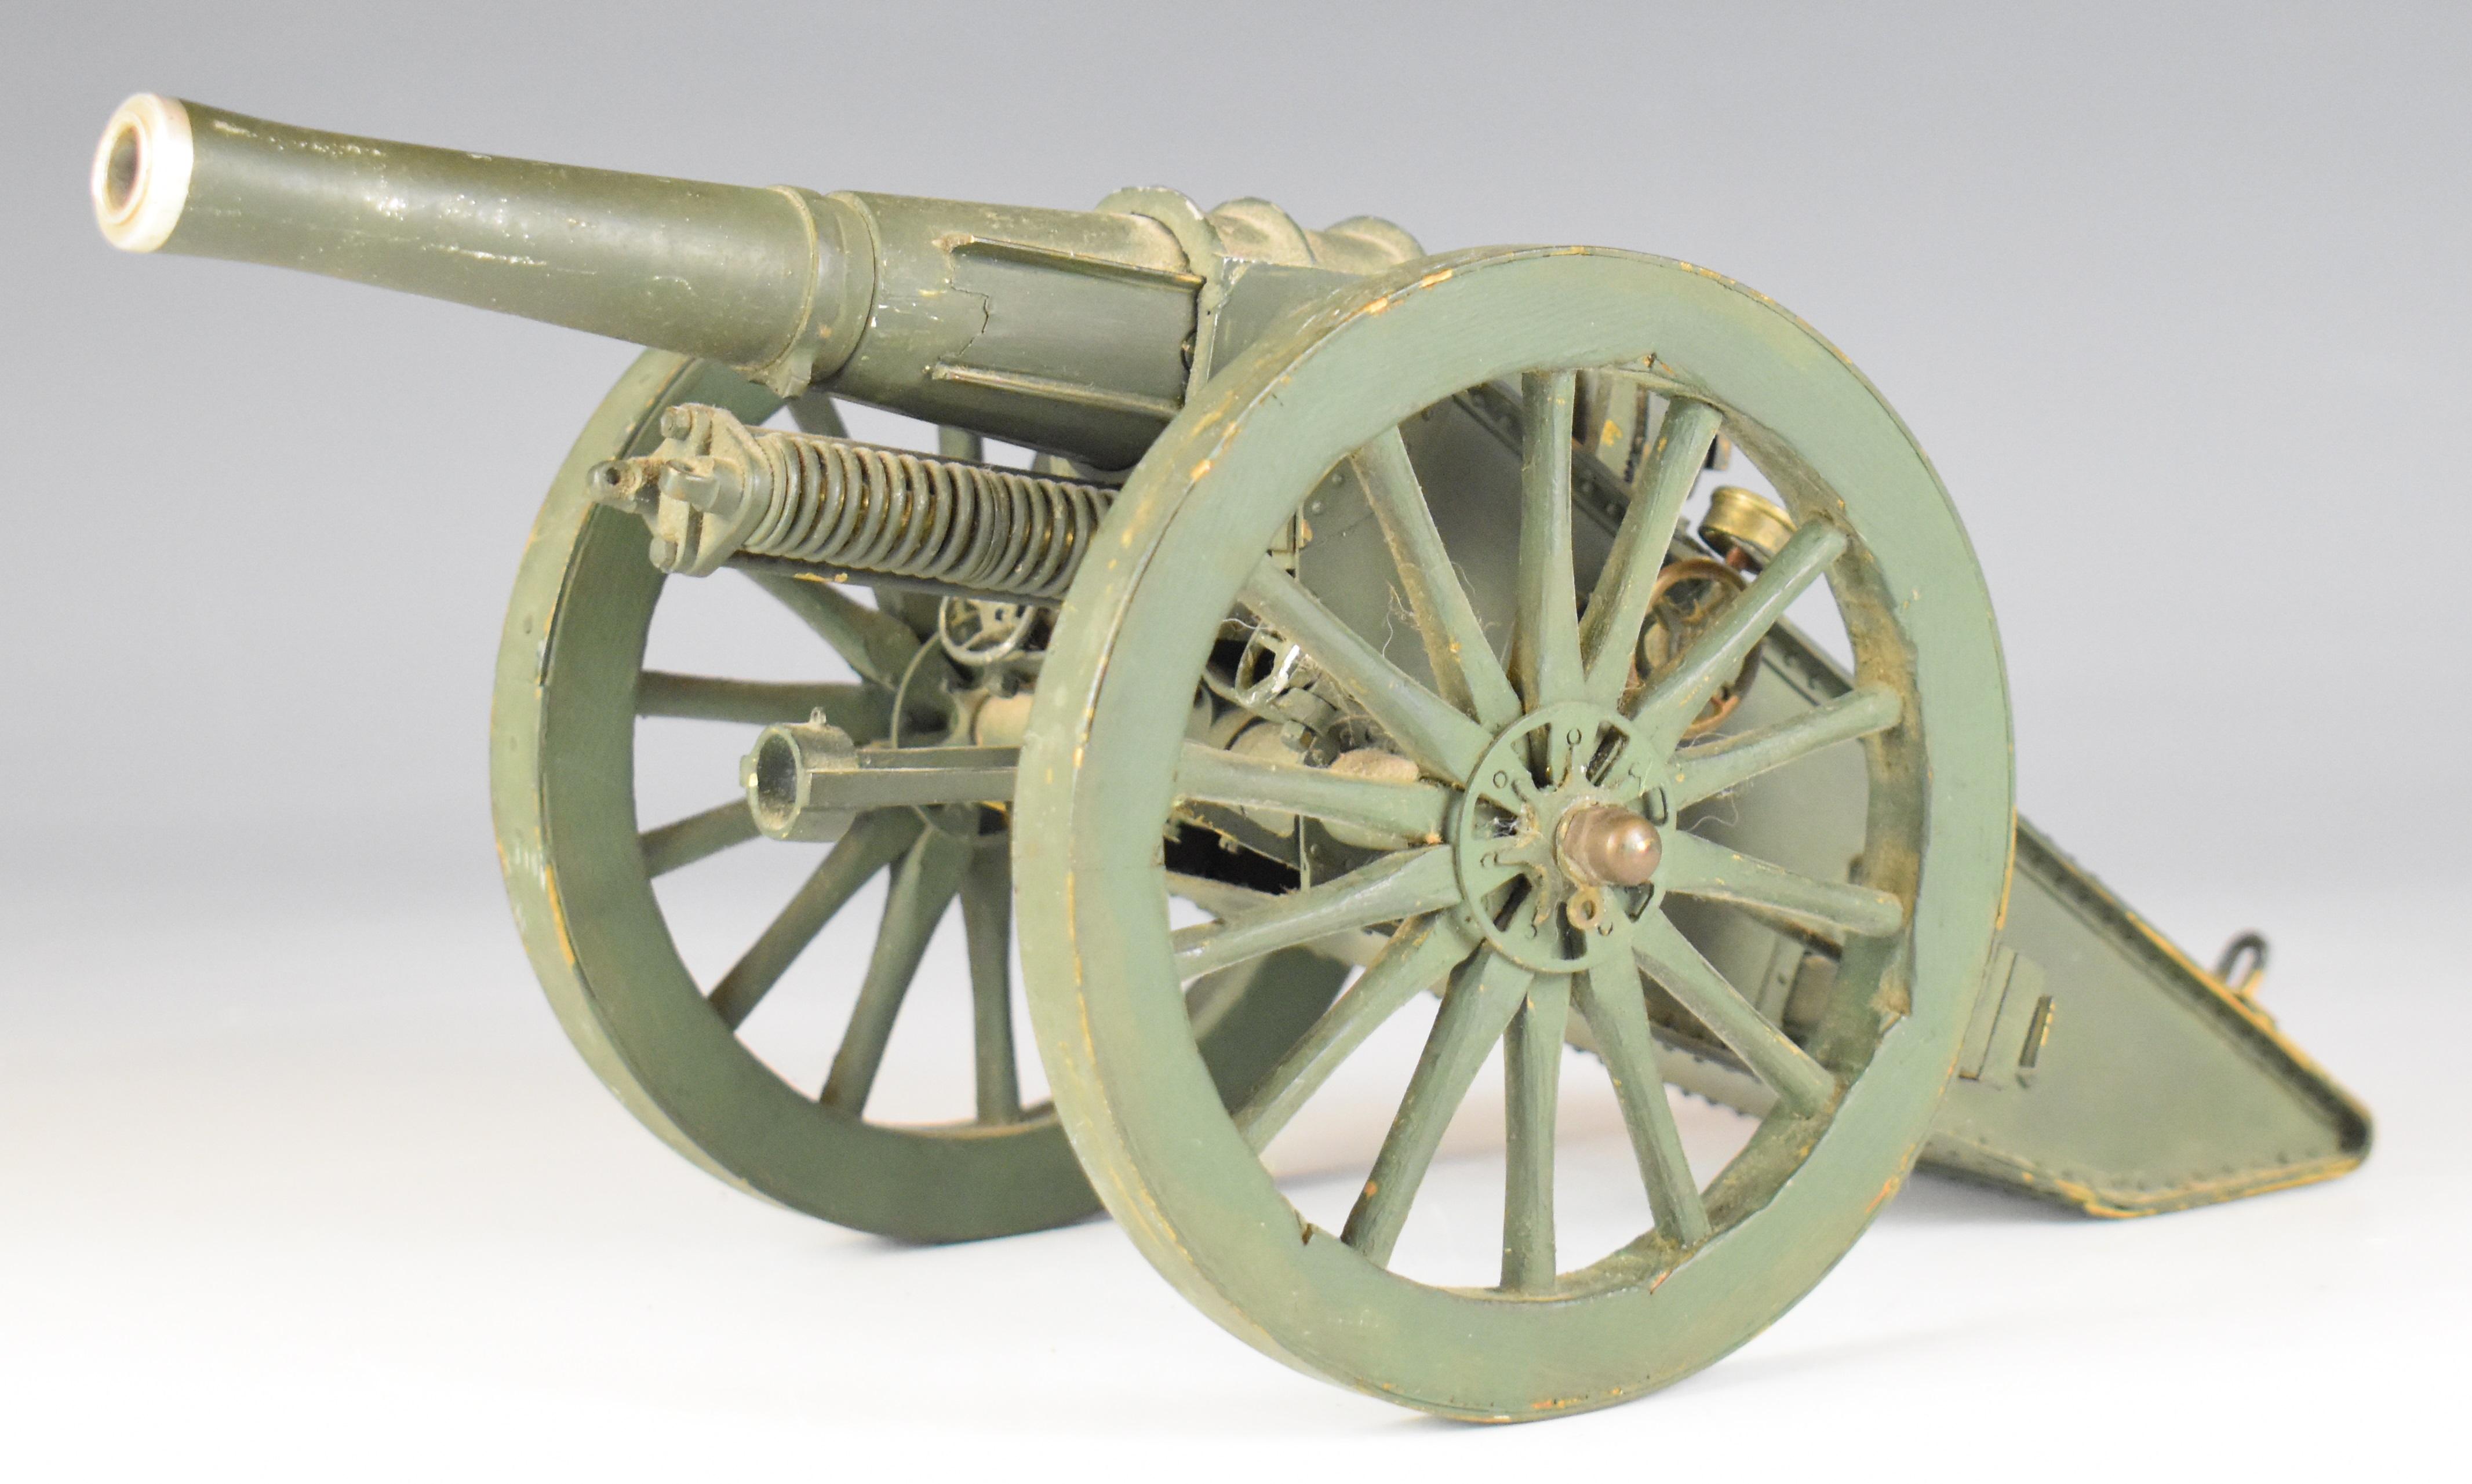 Breech loading desk cannon or field gun with 7 inch graduated barrel, overall length 28.5cm.